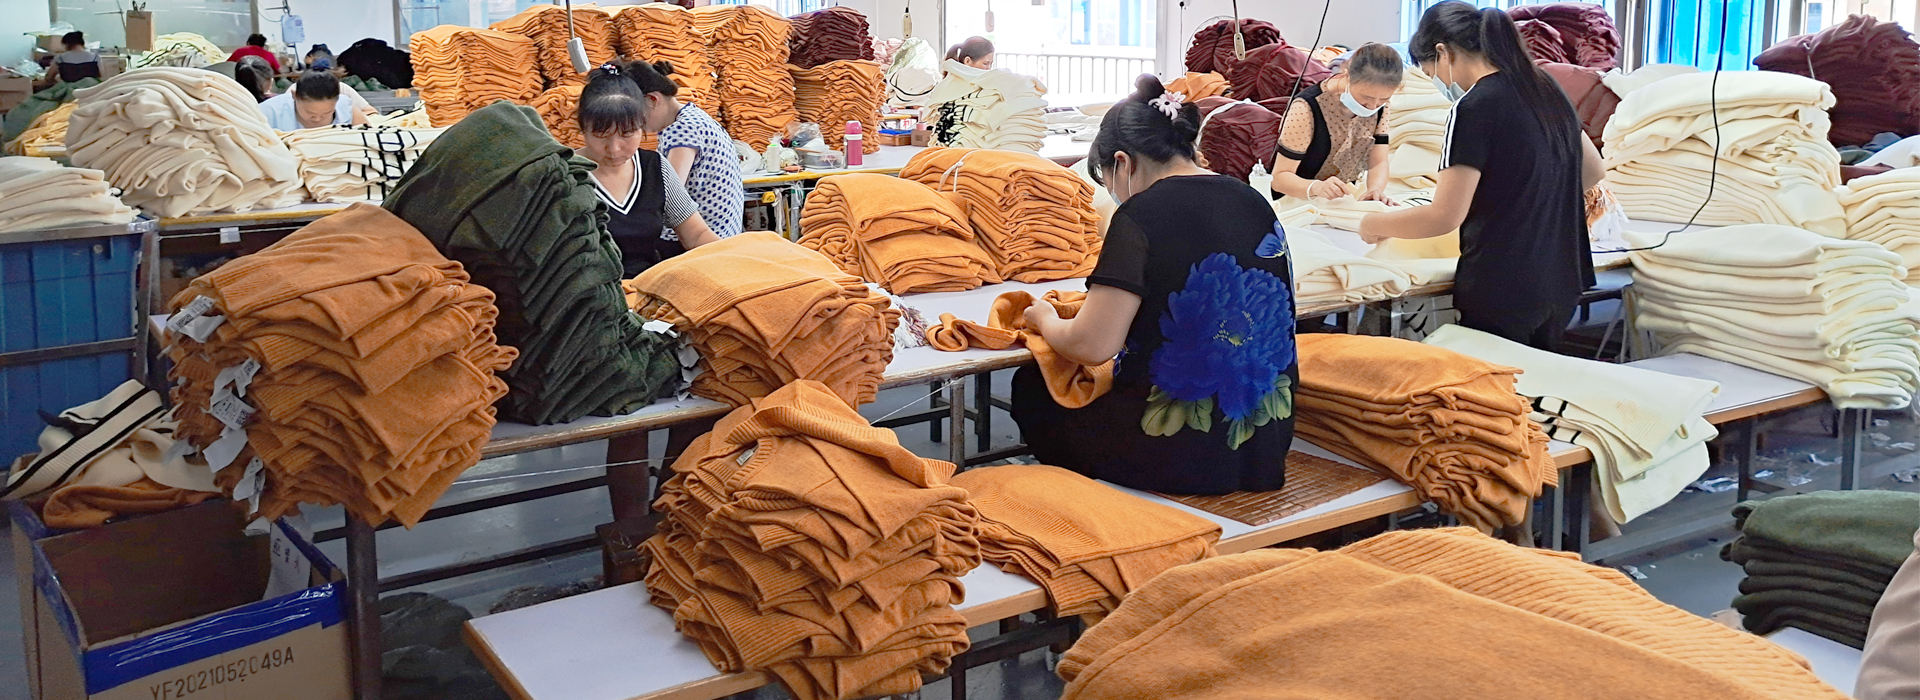 Sweater factory